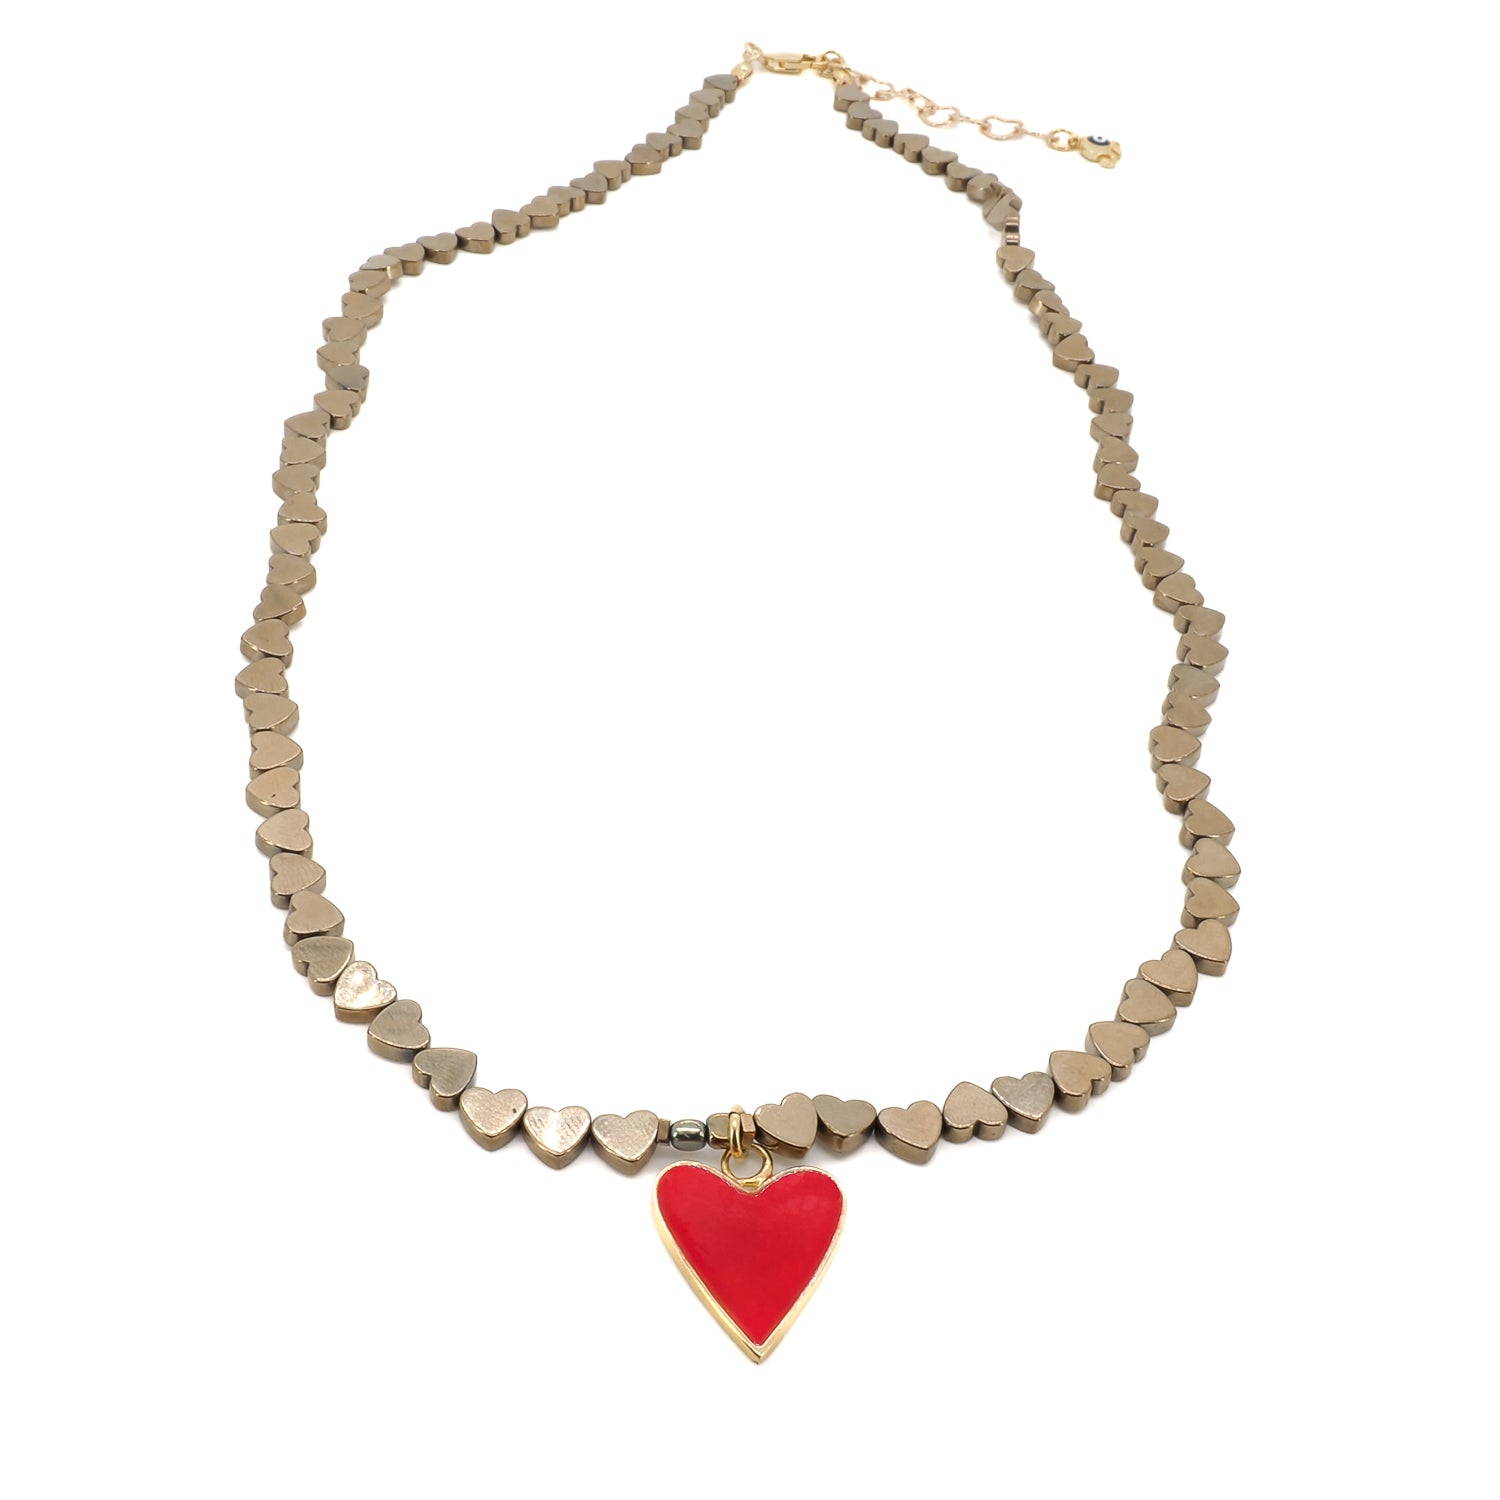 Handcrafted with love, this necklace is made of gold color heart shape hematite stone beads.